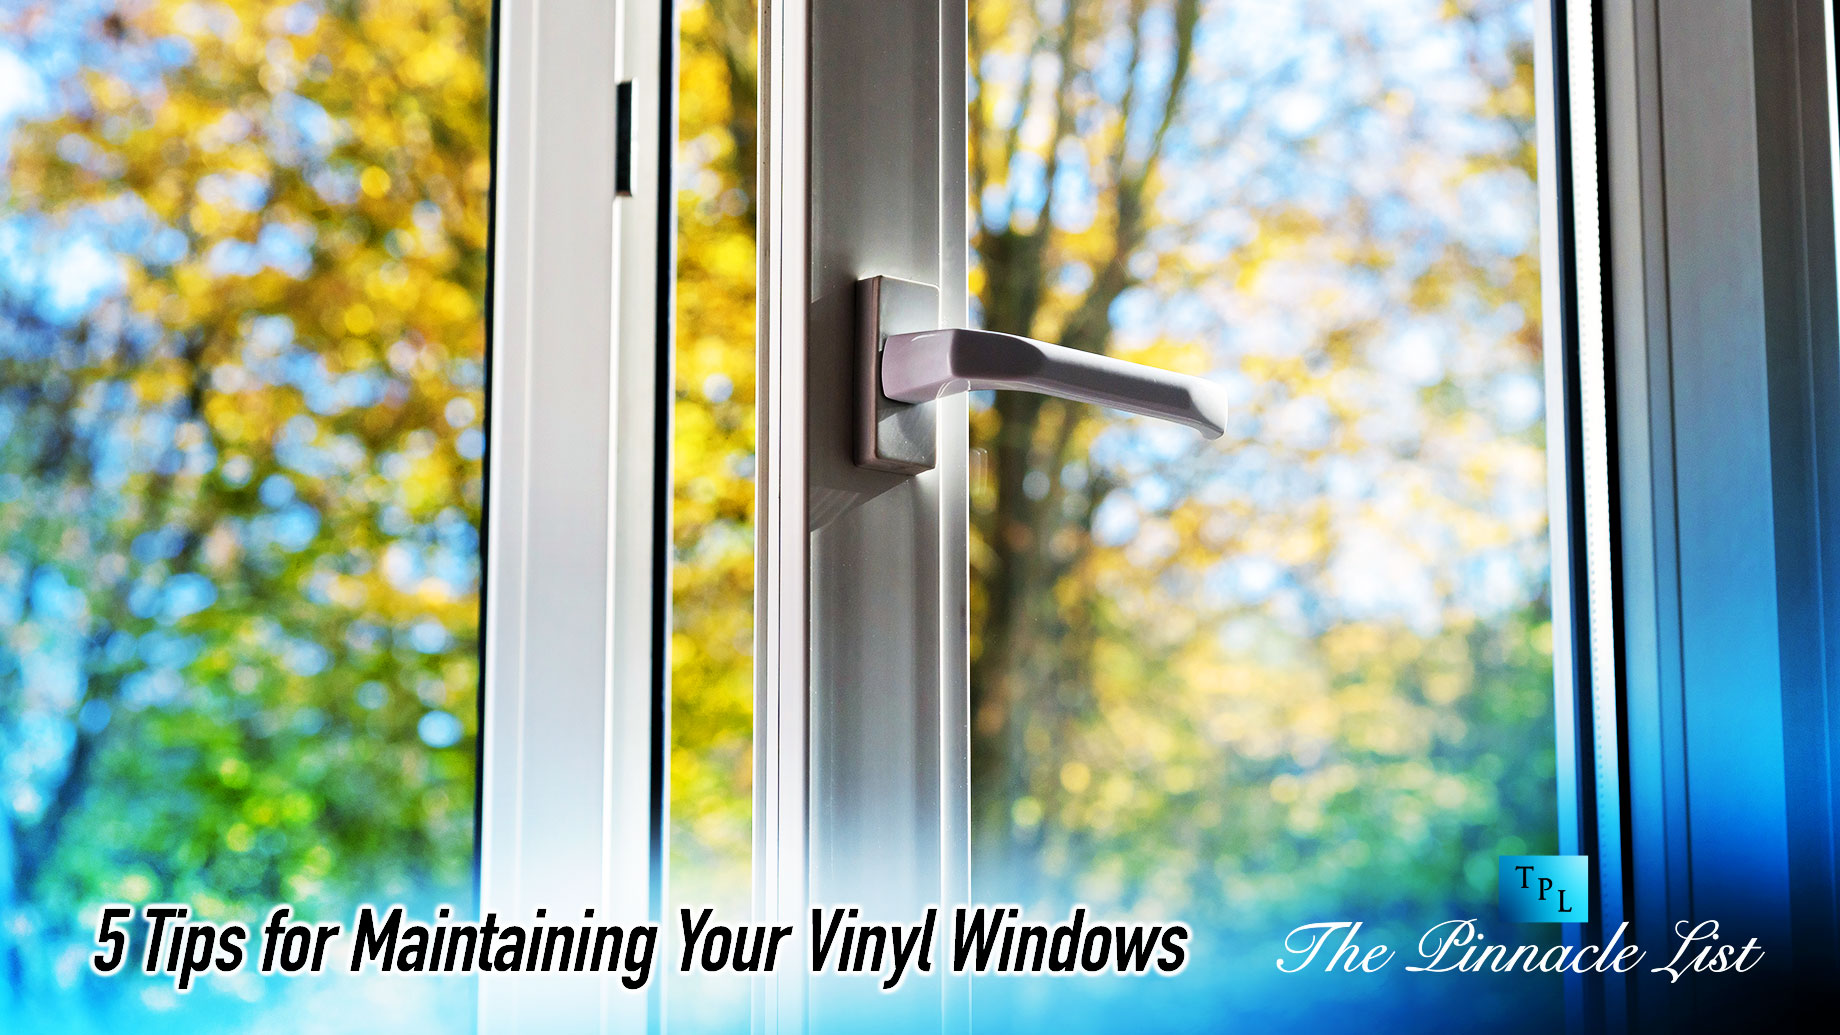 5 Tips for Maintaining Your Vinyl Windows